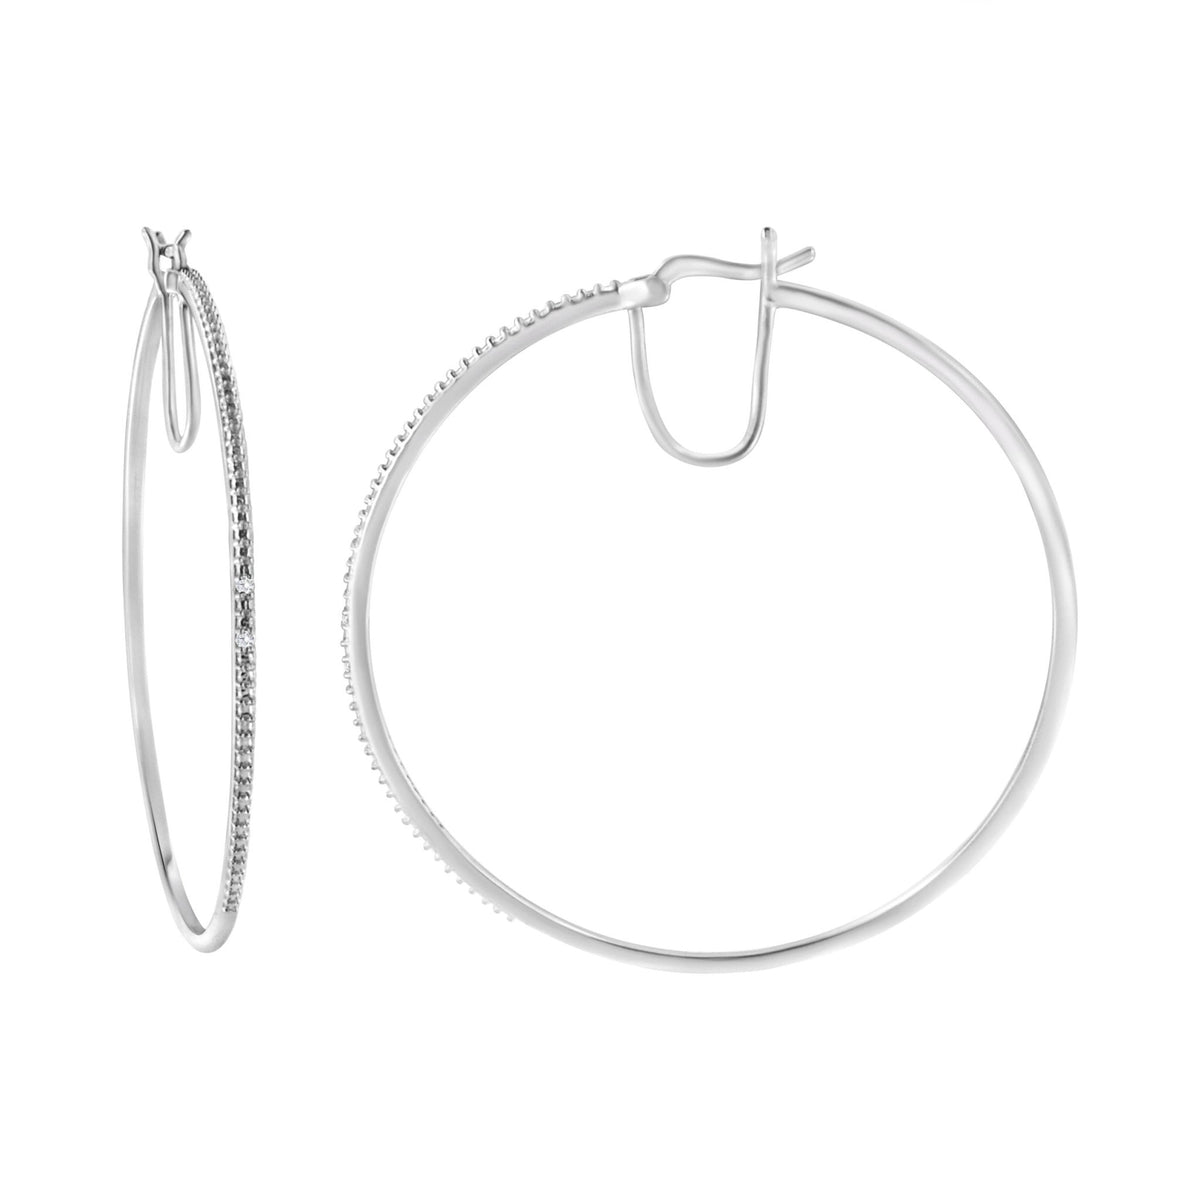 .925 Sterling Silver Diamond Accent Medium Sized Hoops Earrings (I-J Color, I2-I3 Clarity) - LinkagejewelrydesignLinkagejewelrydesign